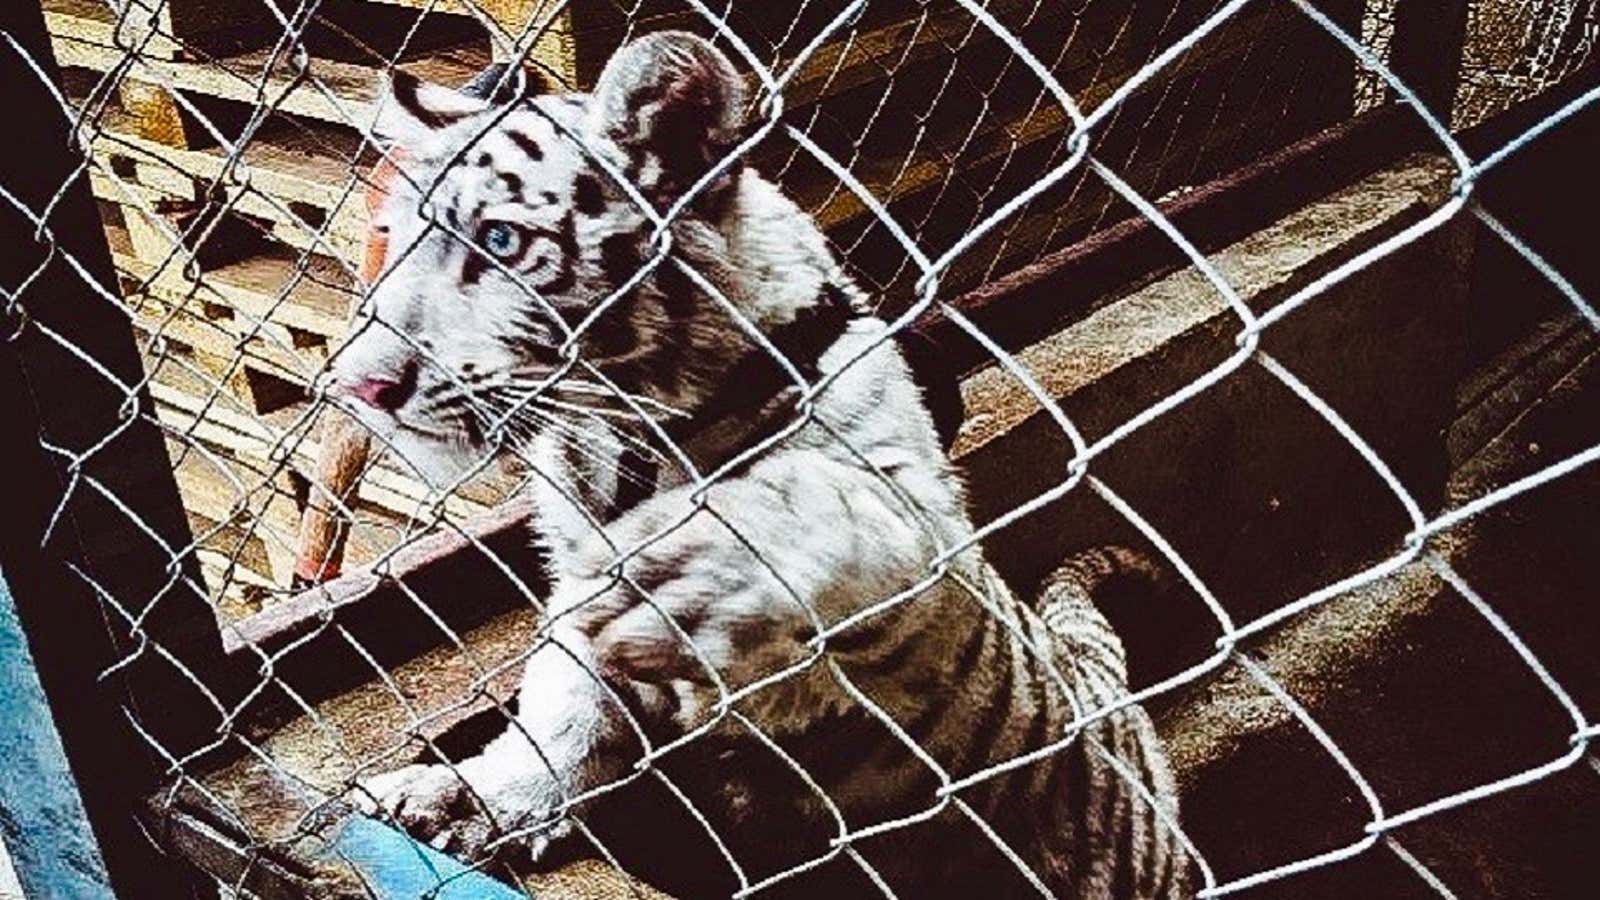 A white tiger cub concealed in a van was seized by authorities in Mexico.